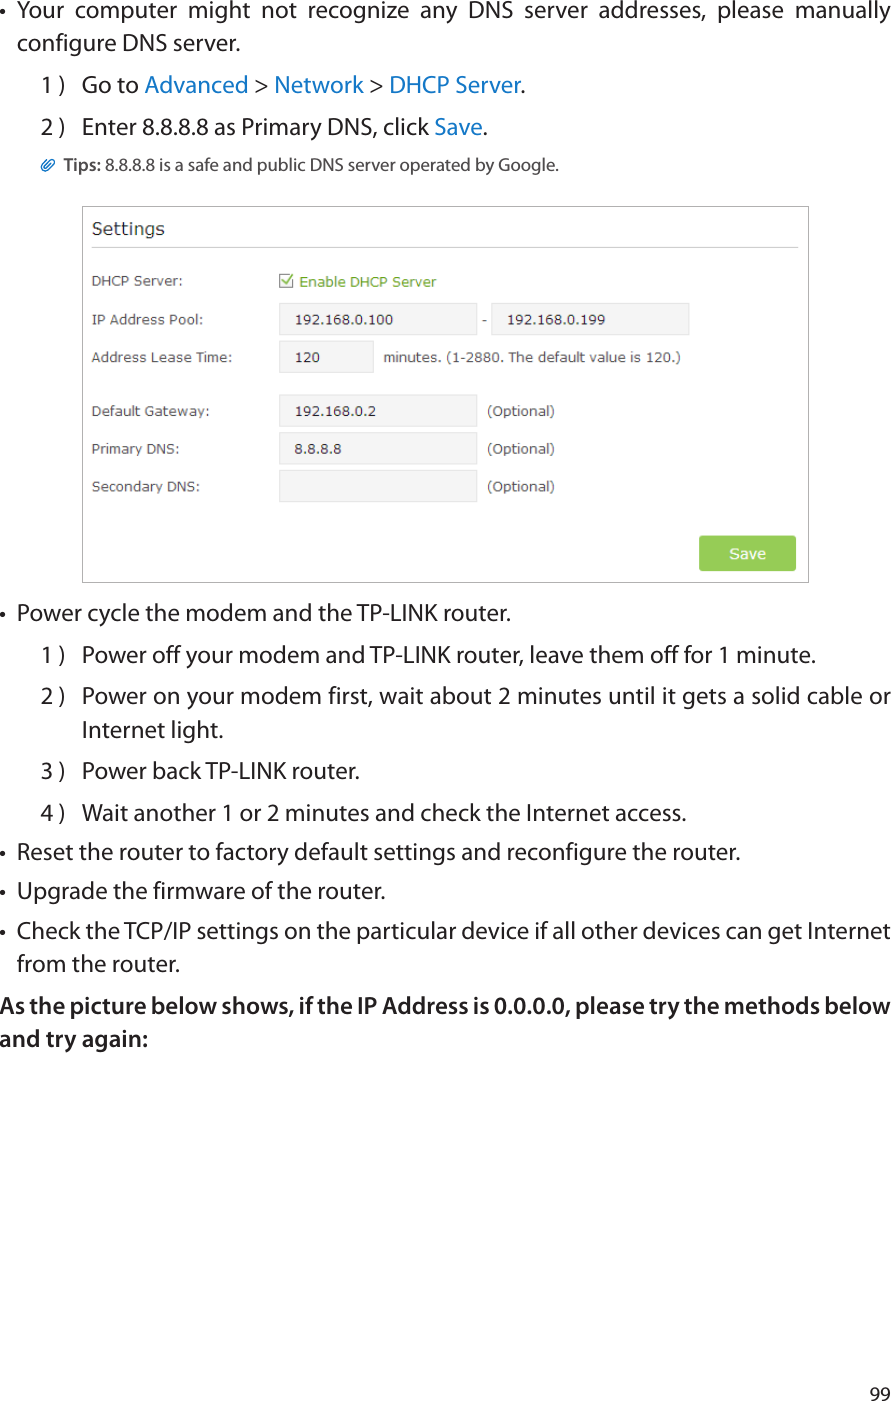 99•  Your computer might not recognize any DNS server addresses, please manually configure DNS server.1 )  Go to Advanced &gt; Network &gt; DHCP Server.2 )  Enter 8.8.8.8 as Primary DNS, click Save. Tips: 8.8.8.8 is a safe and public DNS server operated by Google.•  Power cycle the modem and the TP-LINK router.1 )  Power off your modem and TP-LINK router, leave them off for 1 minute.2 )  Power on your modem first, wait about 2 minutes until it gets a solid cable or Internet light.3 )  Power back TP-LINK router.4 )  Wait another 1 or 2 minutes and check the Internet access.•  Reset the router to factory default settings and reconfigure the router.•  Upgrade the firmware of the router.•  Check the TCP/IP settings on the particular device if all other devices can get Internet from the router.As the picture below shows, if the IP Address is 0.0.0.0, please try the methods below and try again: